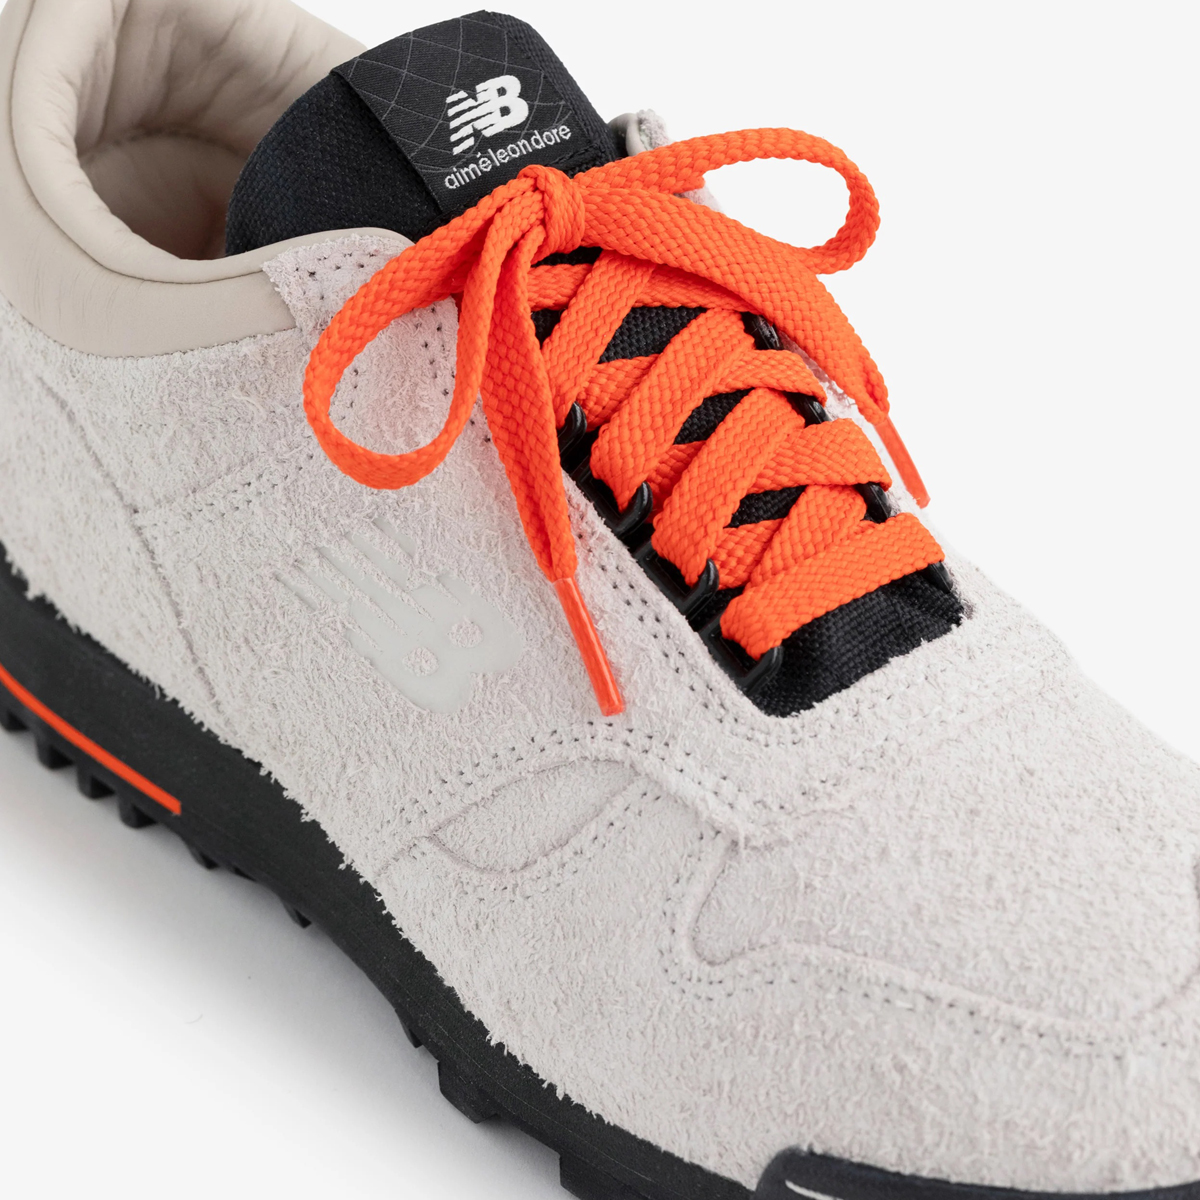 Aime Leon Dore Aries Officially Reveal Their New Balance 991 Duo Grey Orange 2